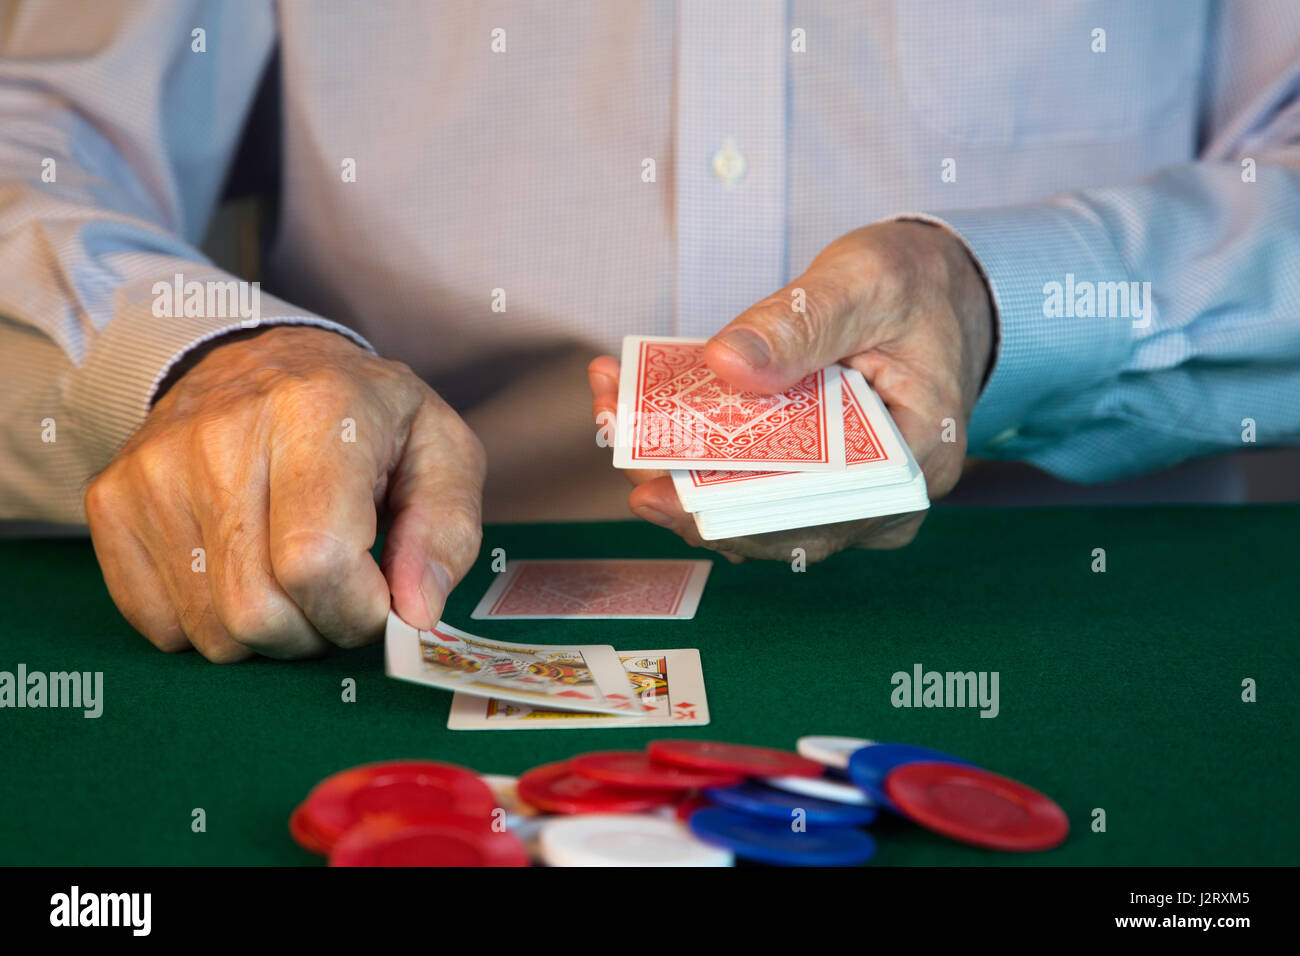 Man Dealing Cards for Poker Game Stock Photo